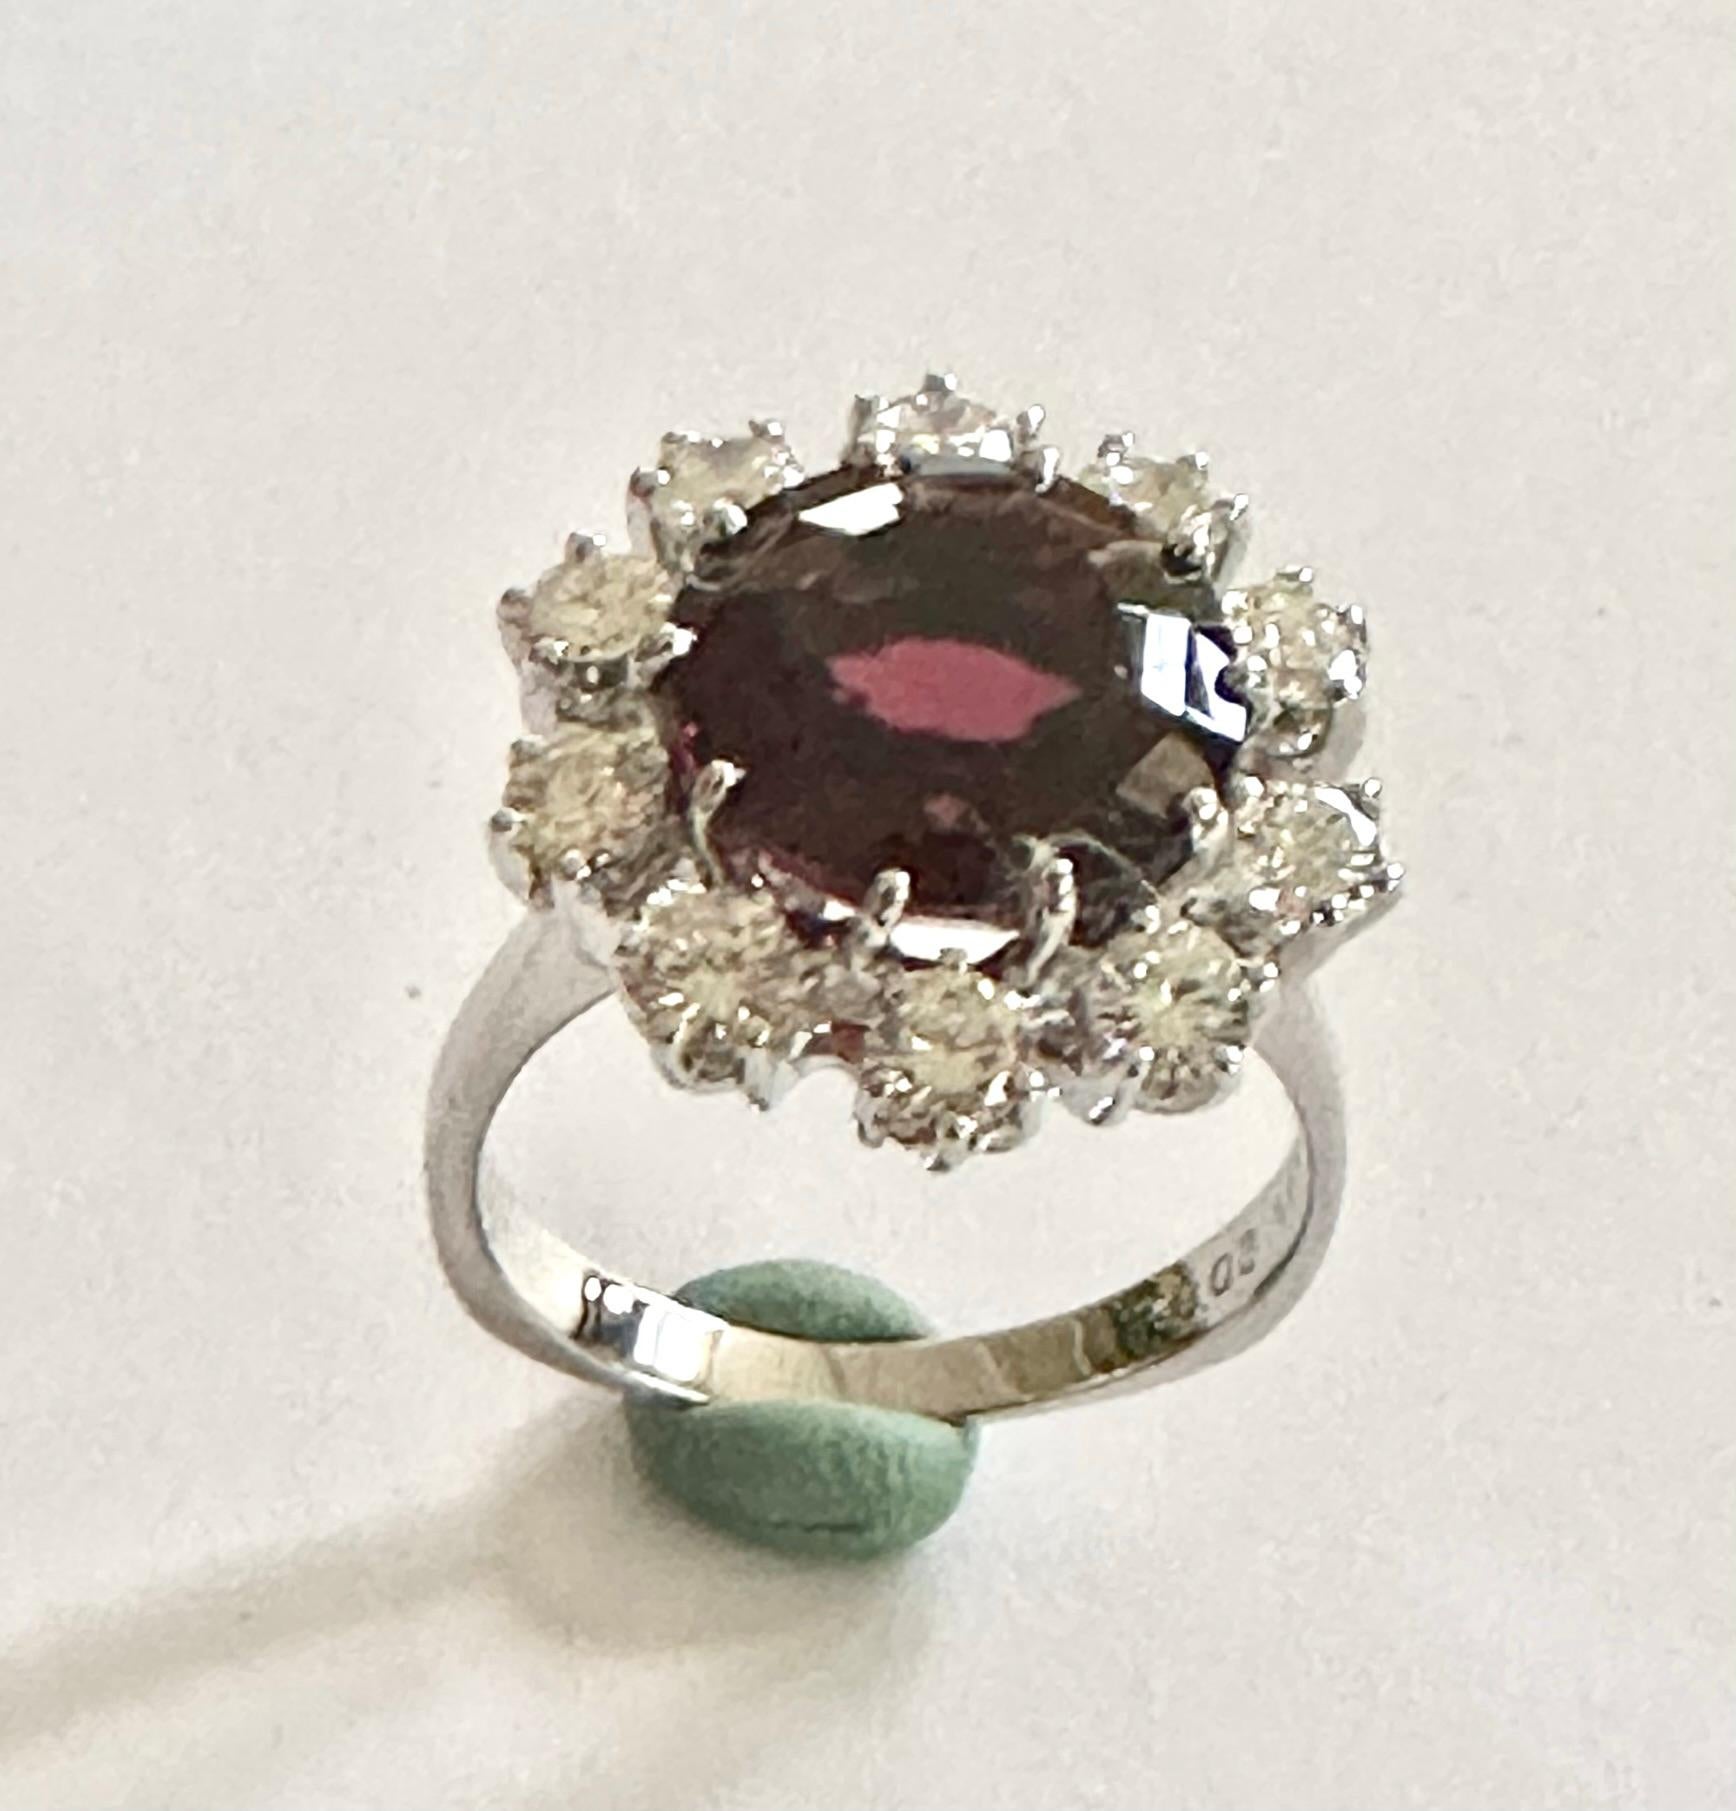 One (1) 14K.  white  Gold entourage Ring made in Germany 1965 By Eduard G. Fidel  Pforzheim
Set with One Natural Garnet; RHODOLTE weightof : 8.08 ct.  in round Mixed Cut
+  10 brilliant Cut Diamonds of total weight: 1.23 ct  VS-F 
Size of the ring: